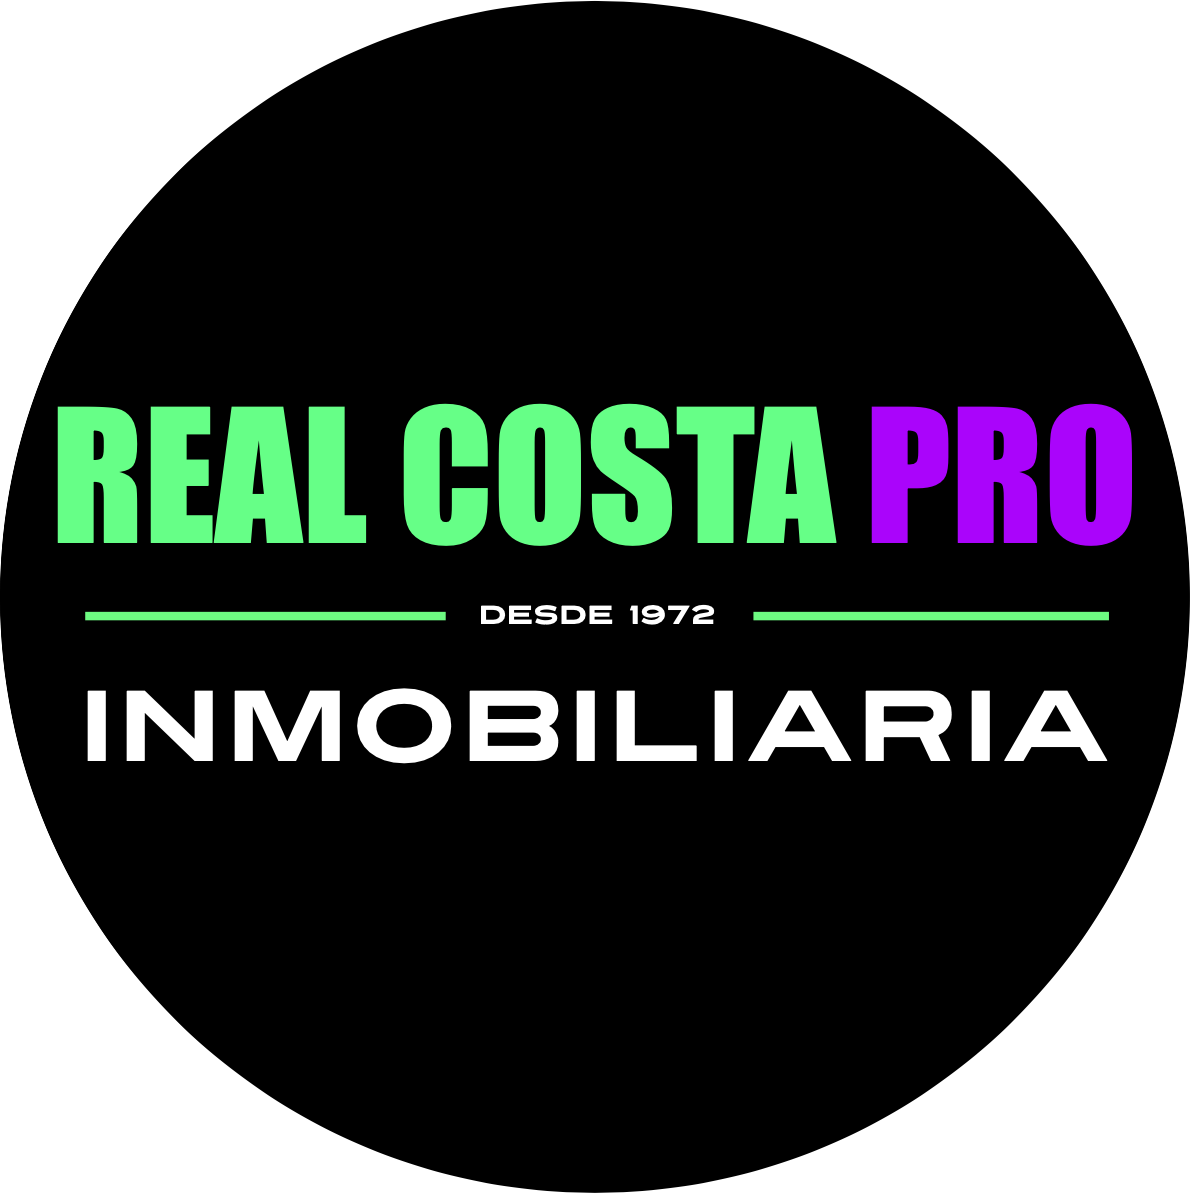 REAL COSTA PRO